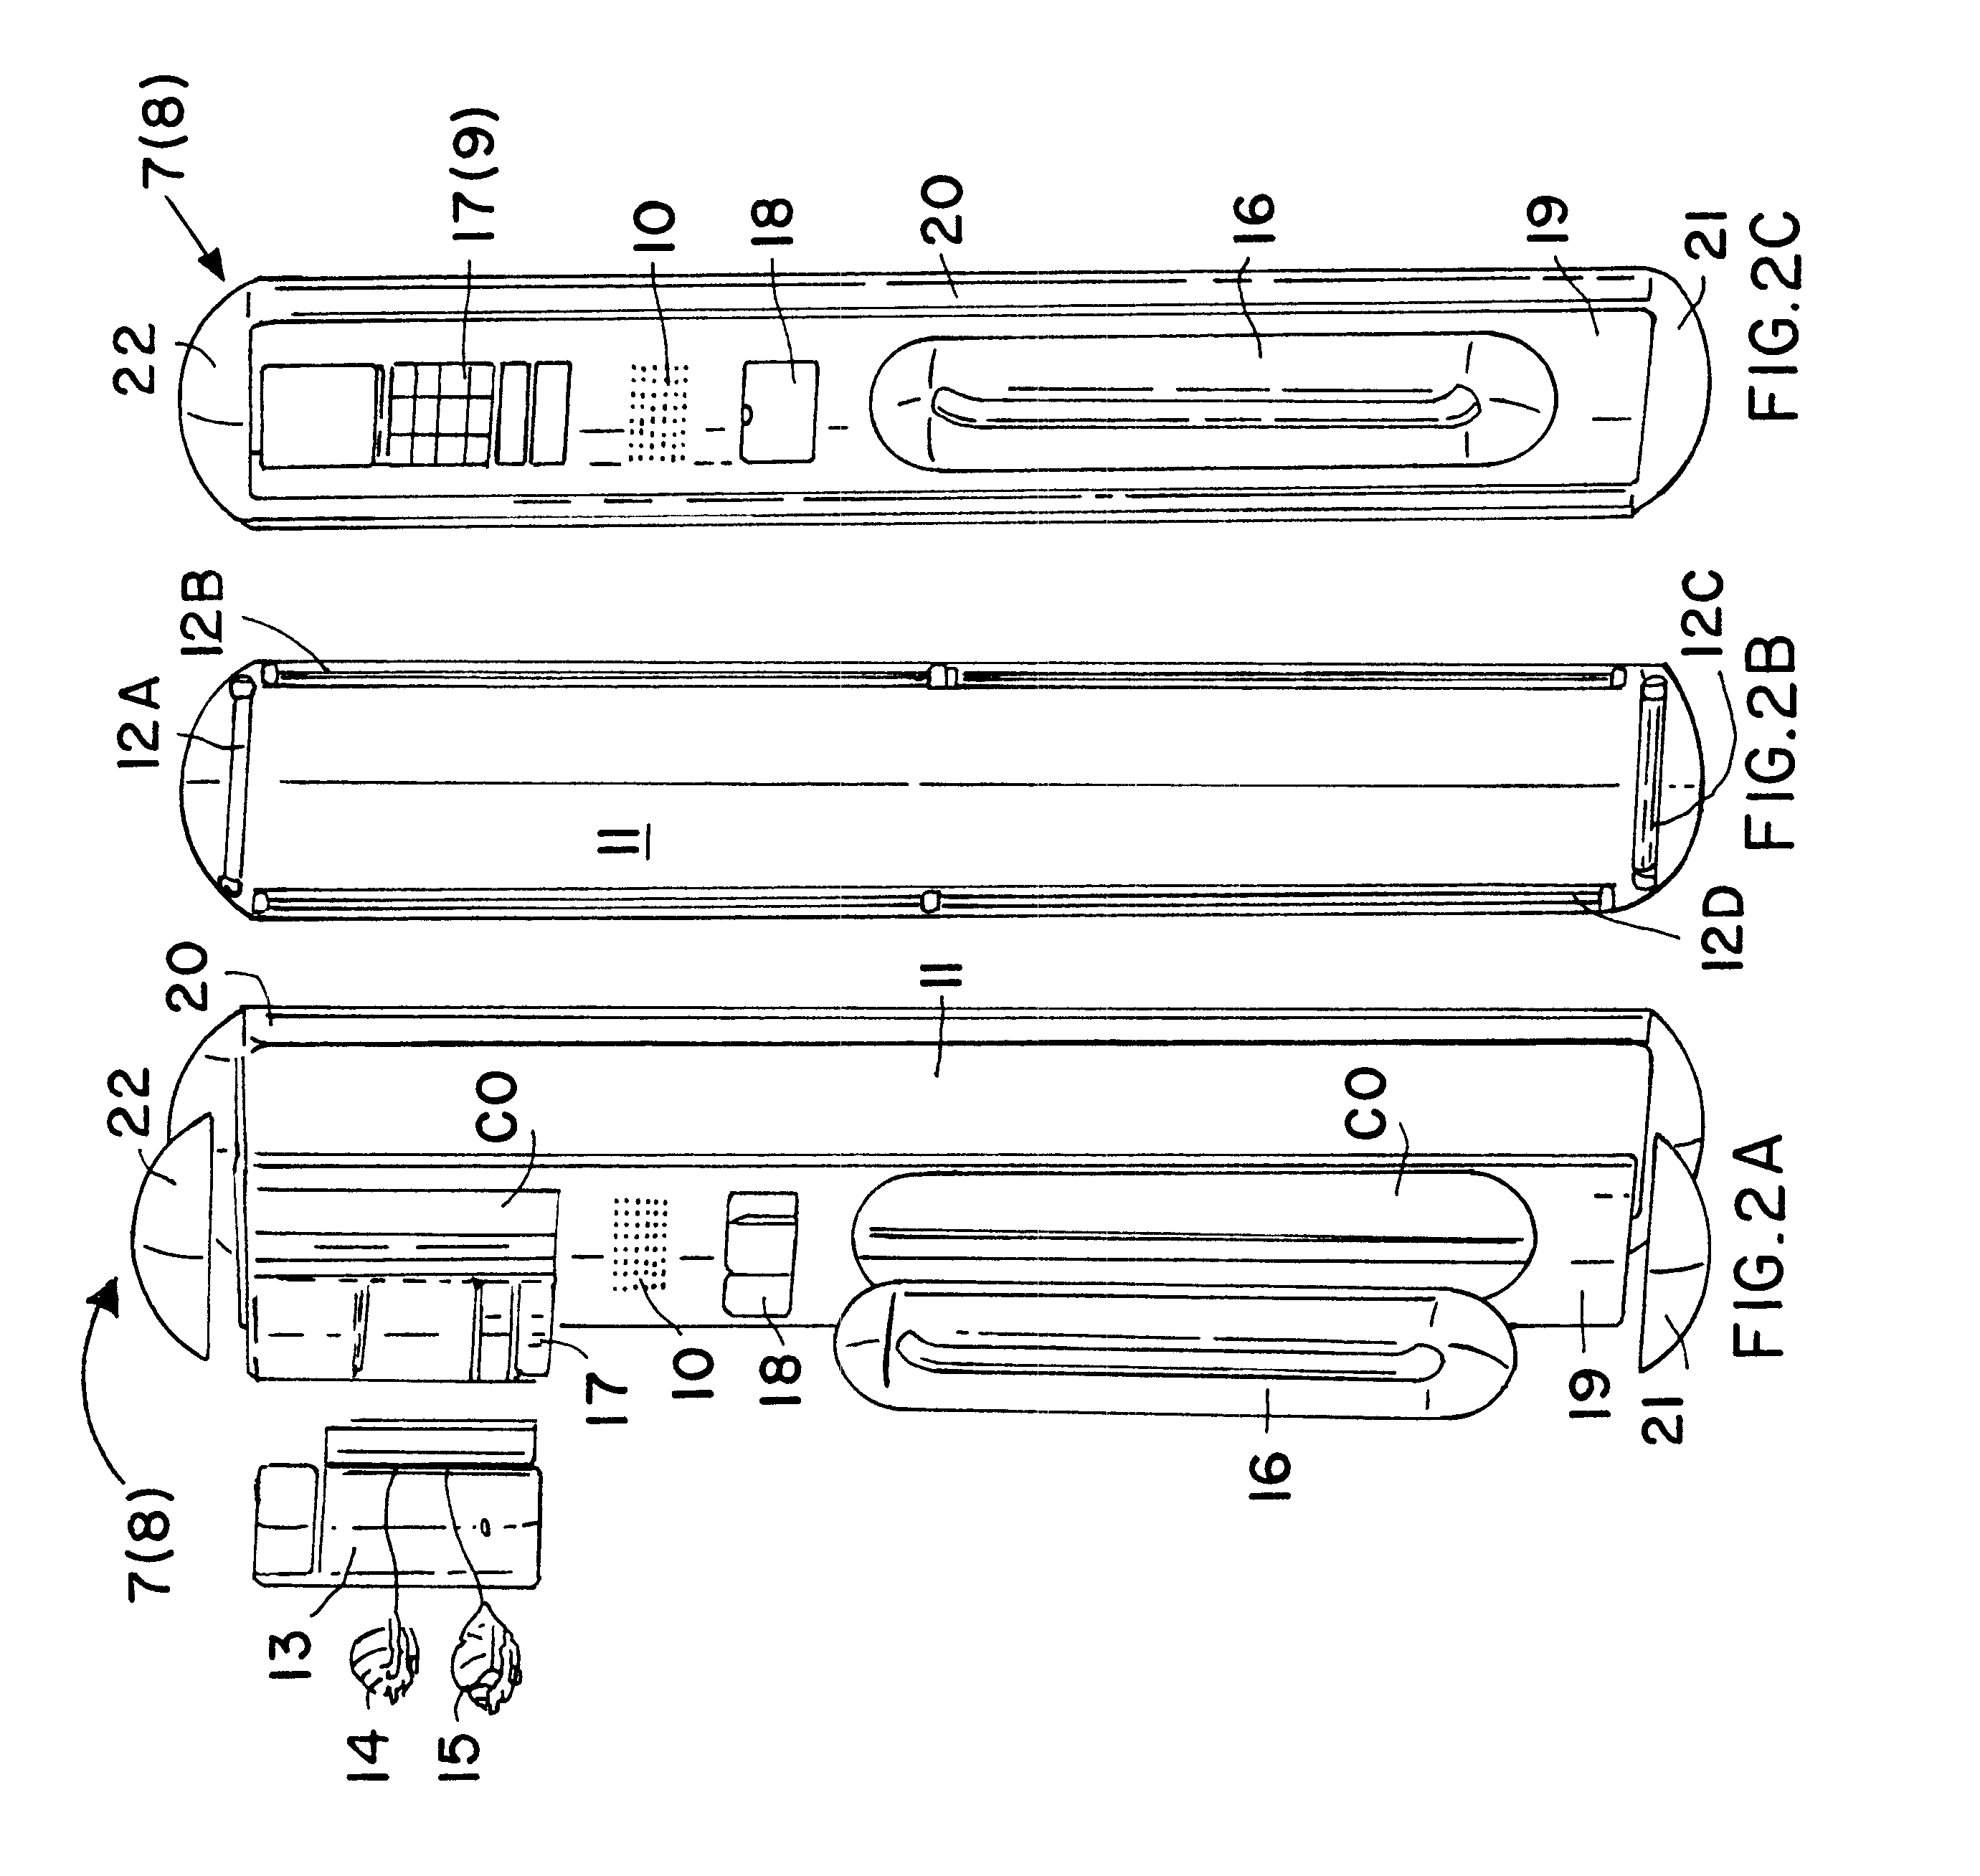 Comfort and illumination apparatus for a passenger space